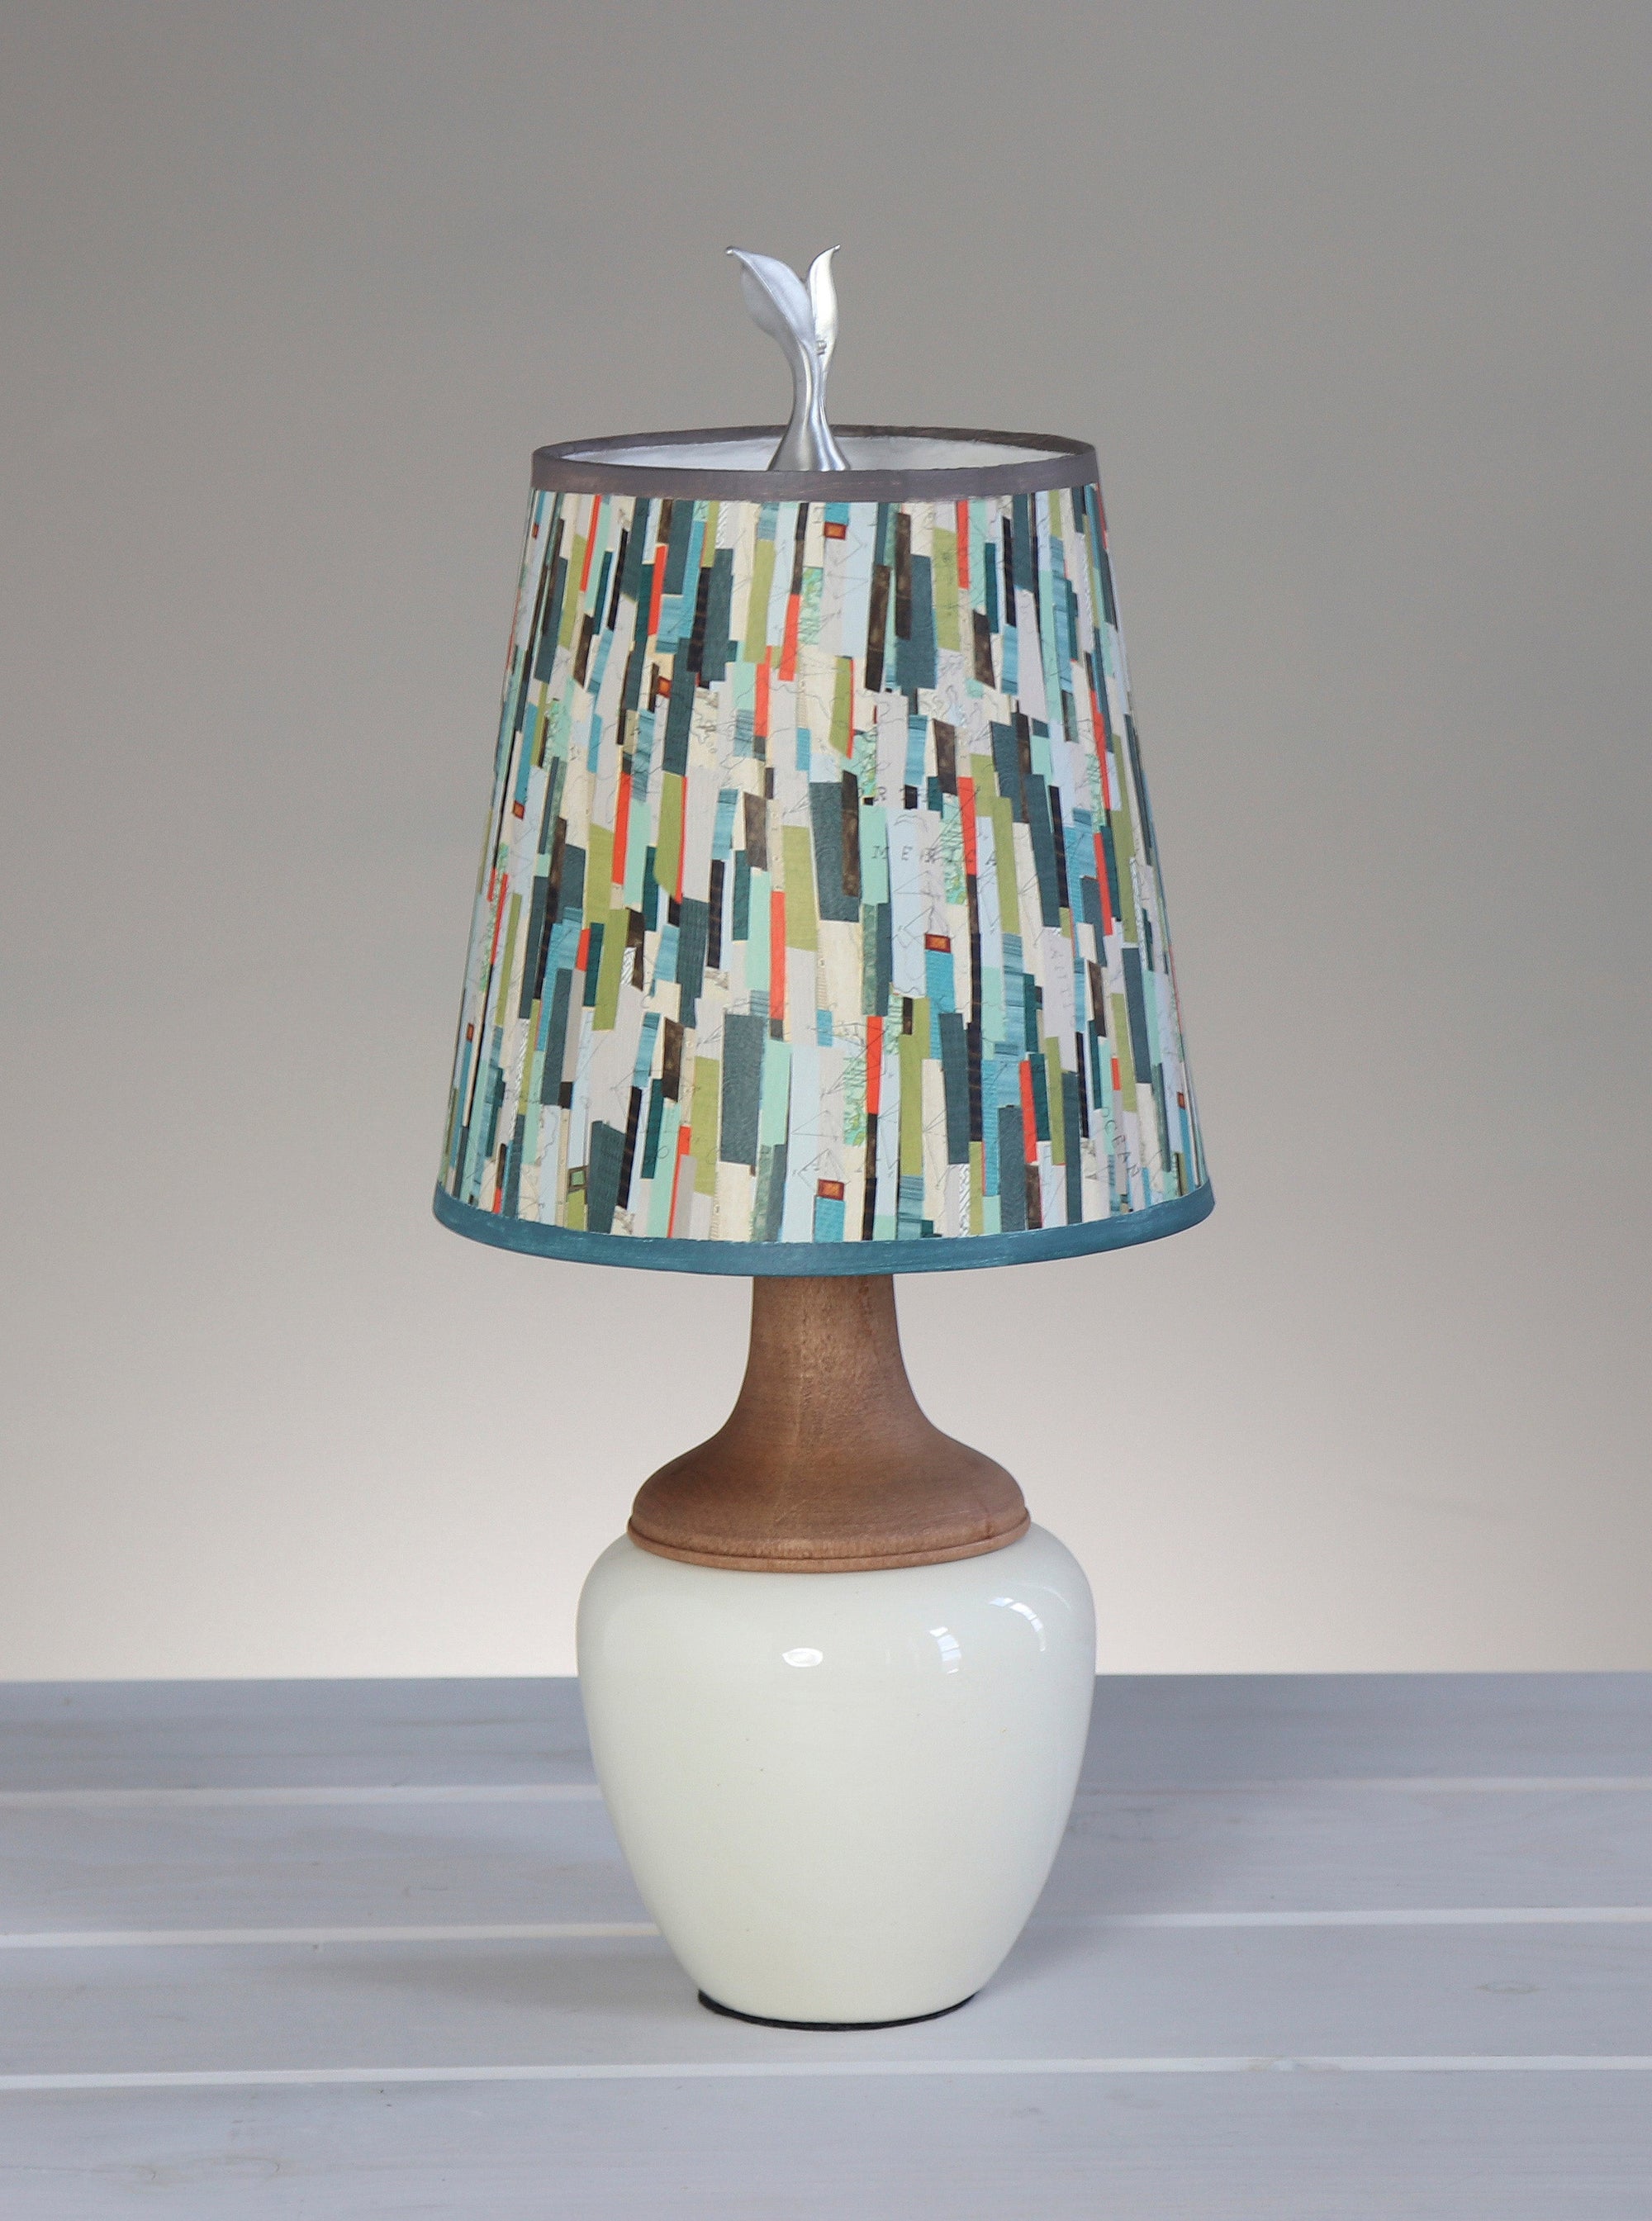 Janna Ugone & Co Table Lamps Ceramic and Maple Table Lamp in Ivory Gloss with Small Drum Shade in Papers